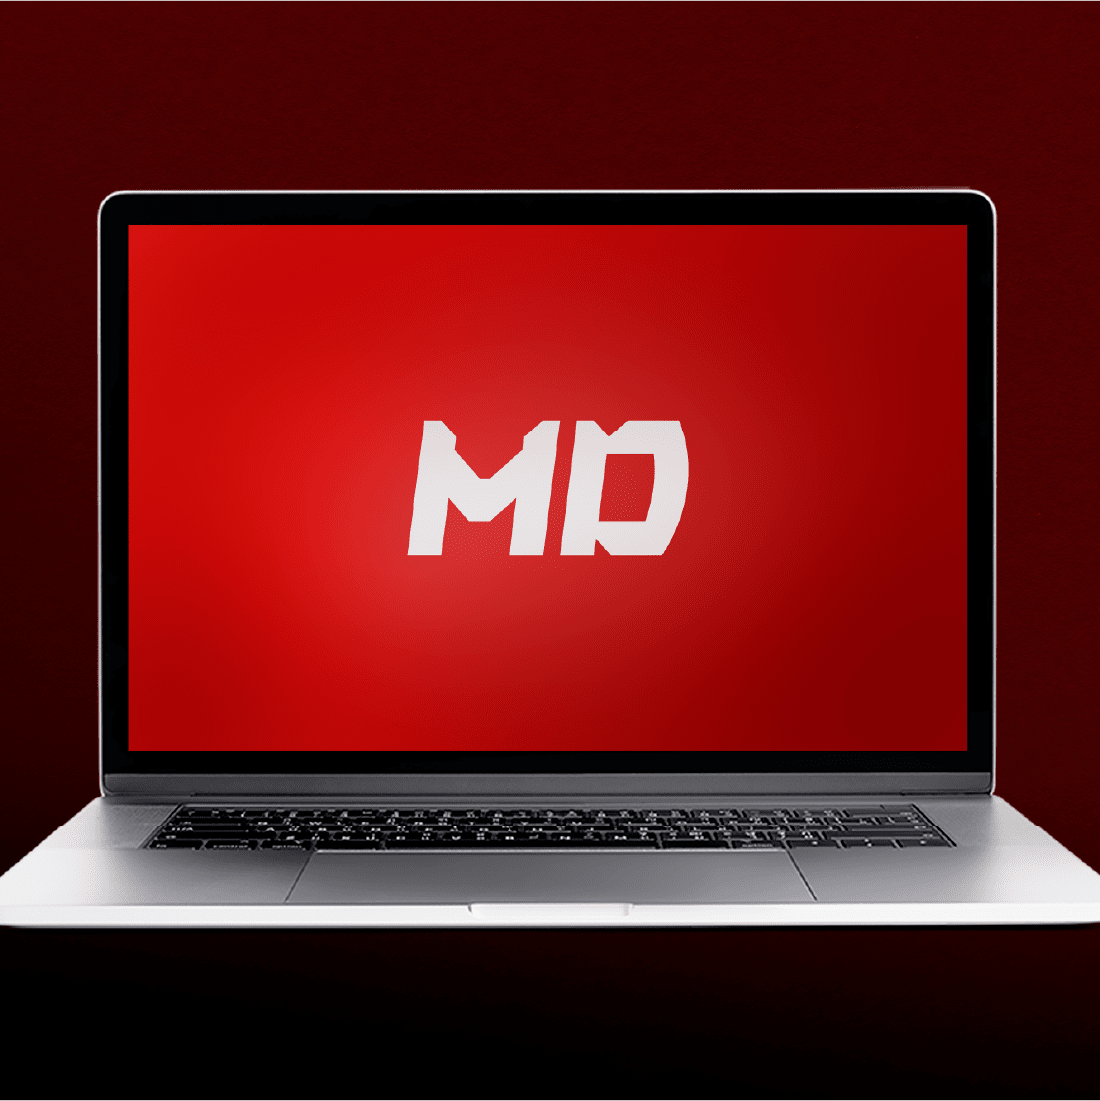 Laptop with red display and white letter logo.